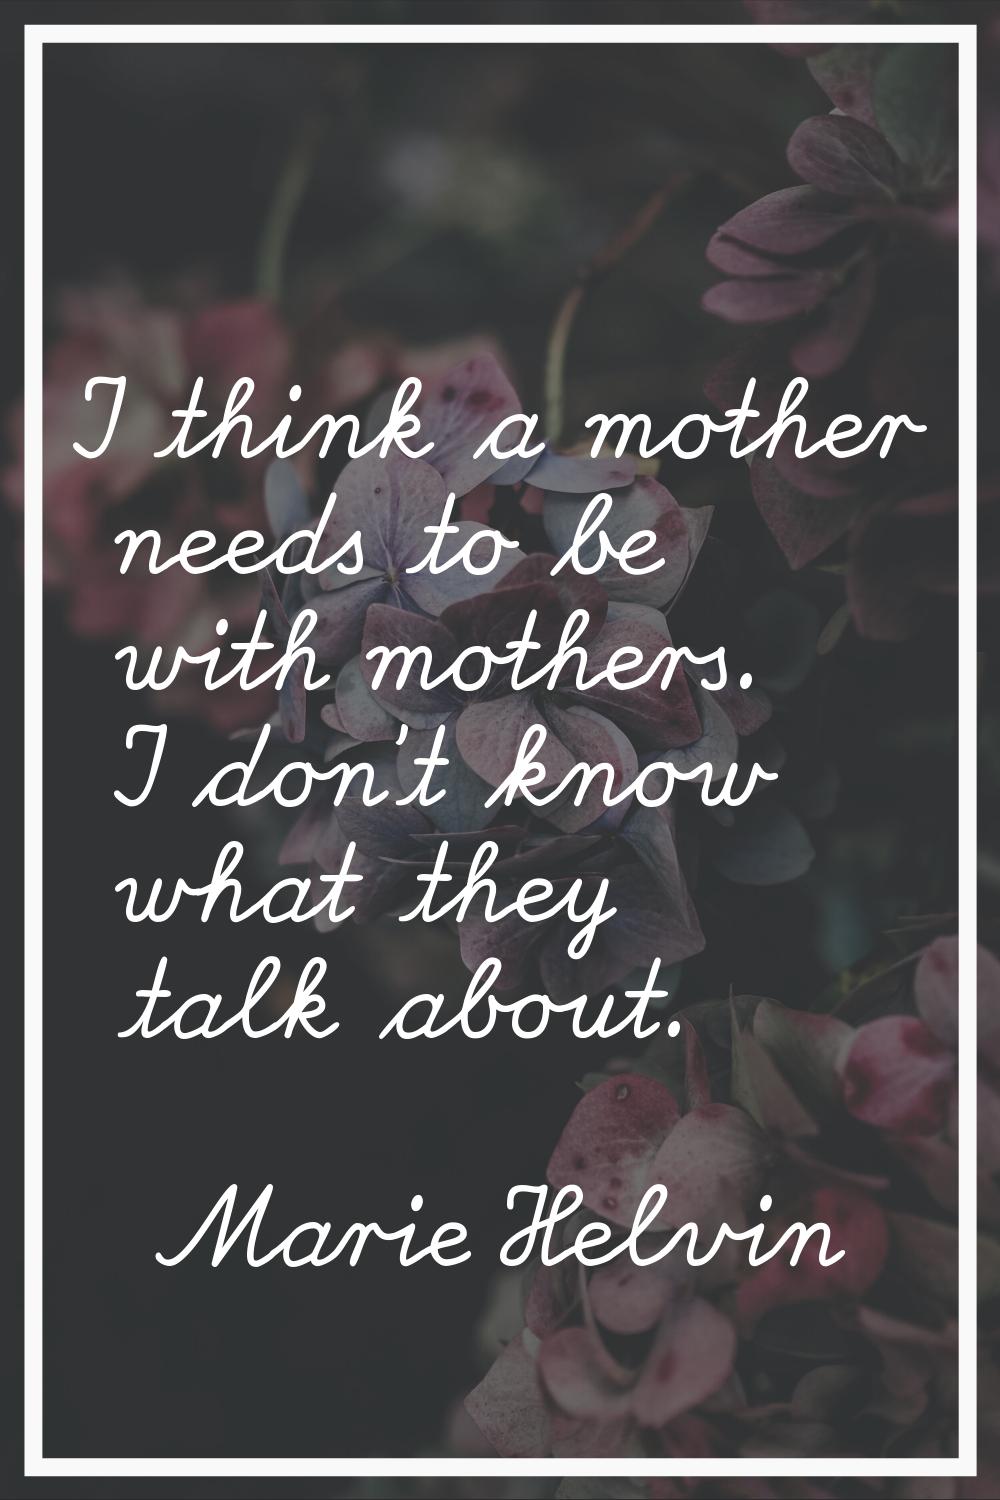 I think a mother needs to be with mothers. I don't know what they talk about.